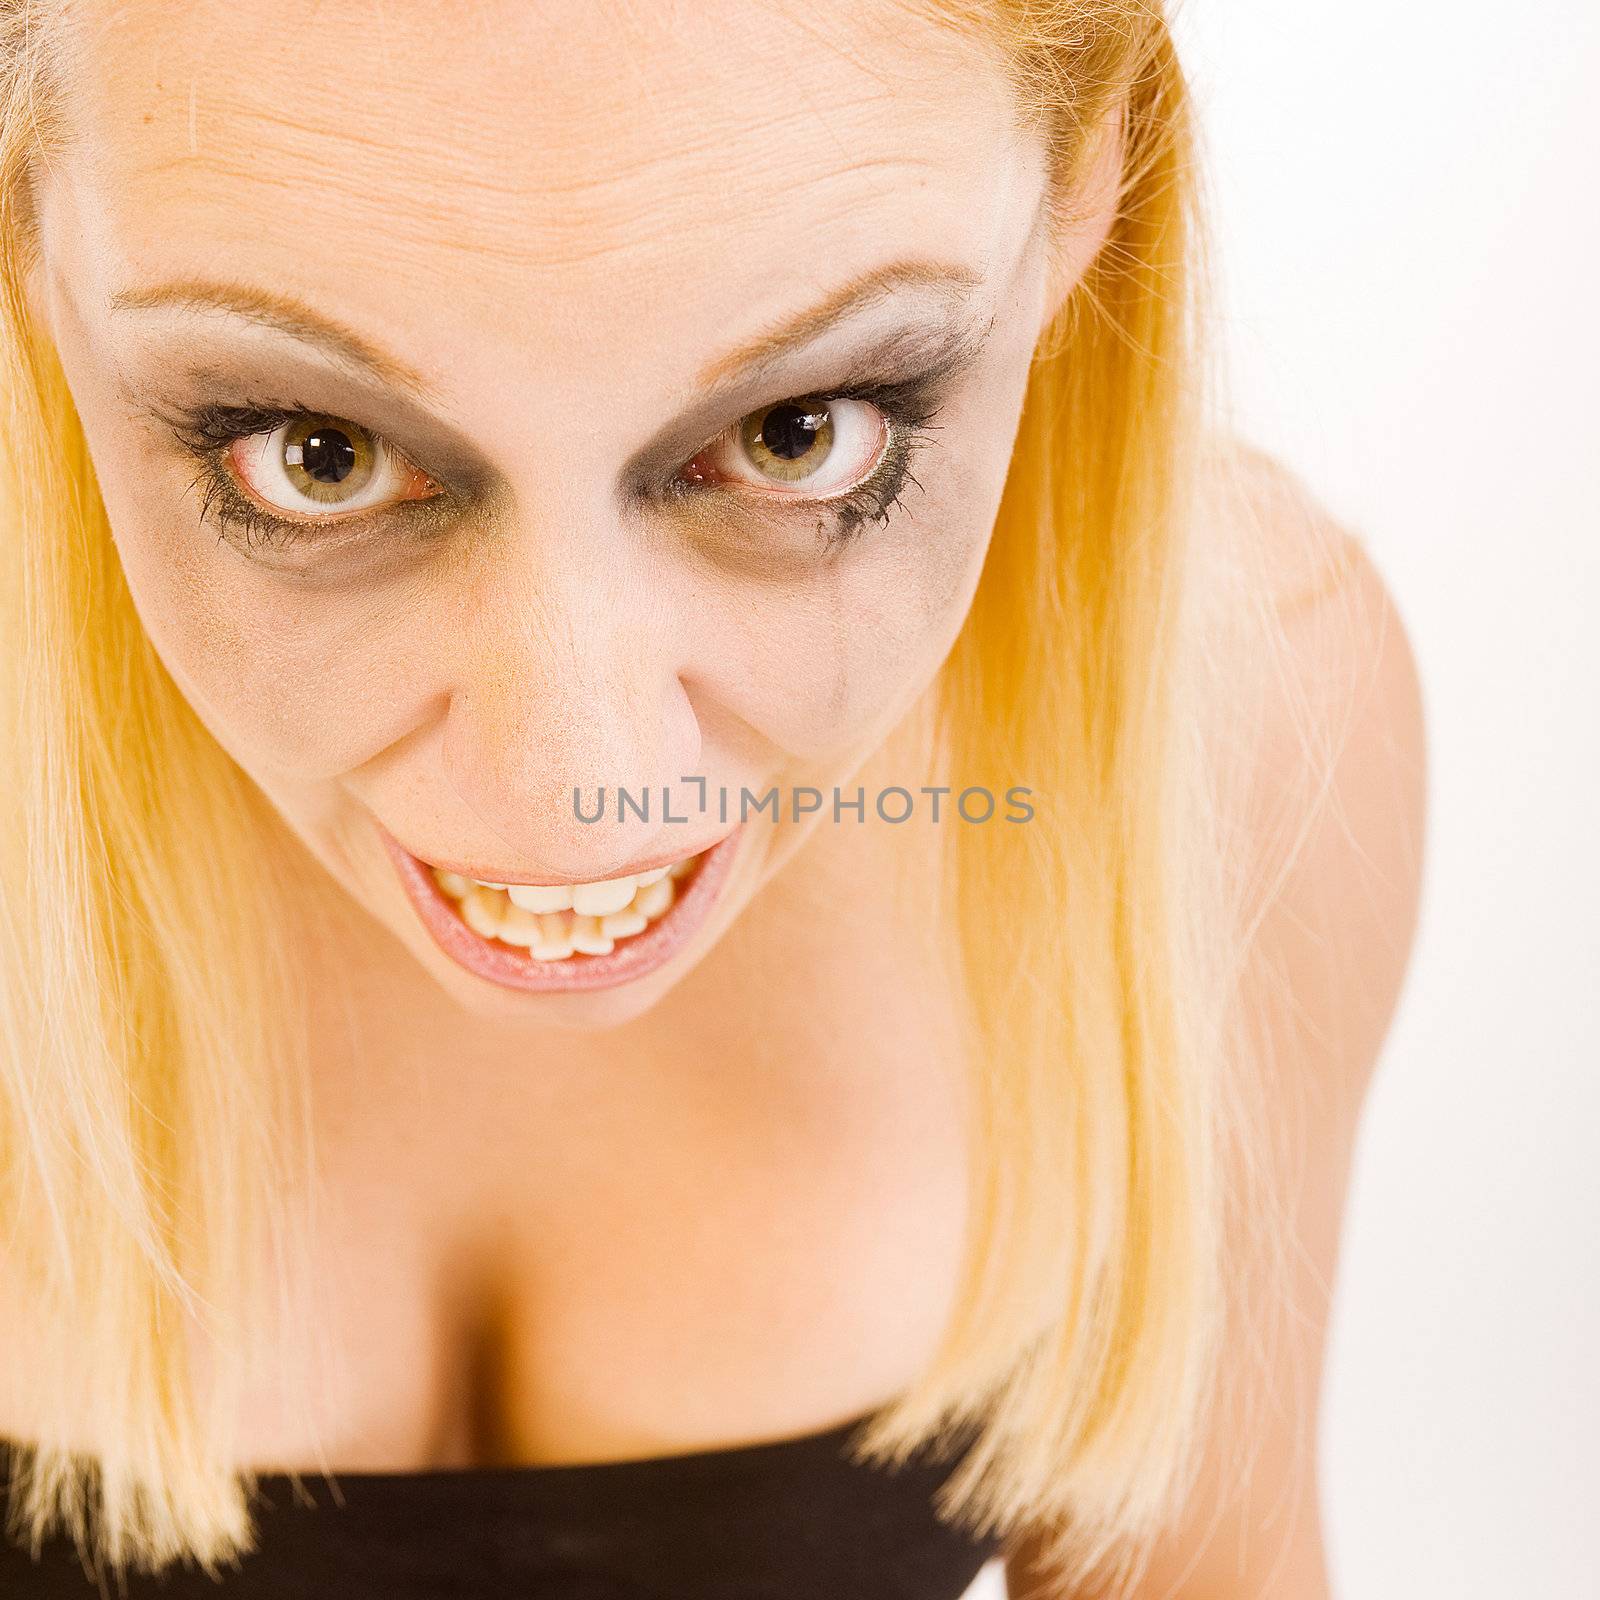 Studio portrait of a young blond woman looking crazy